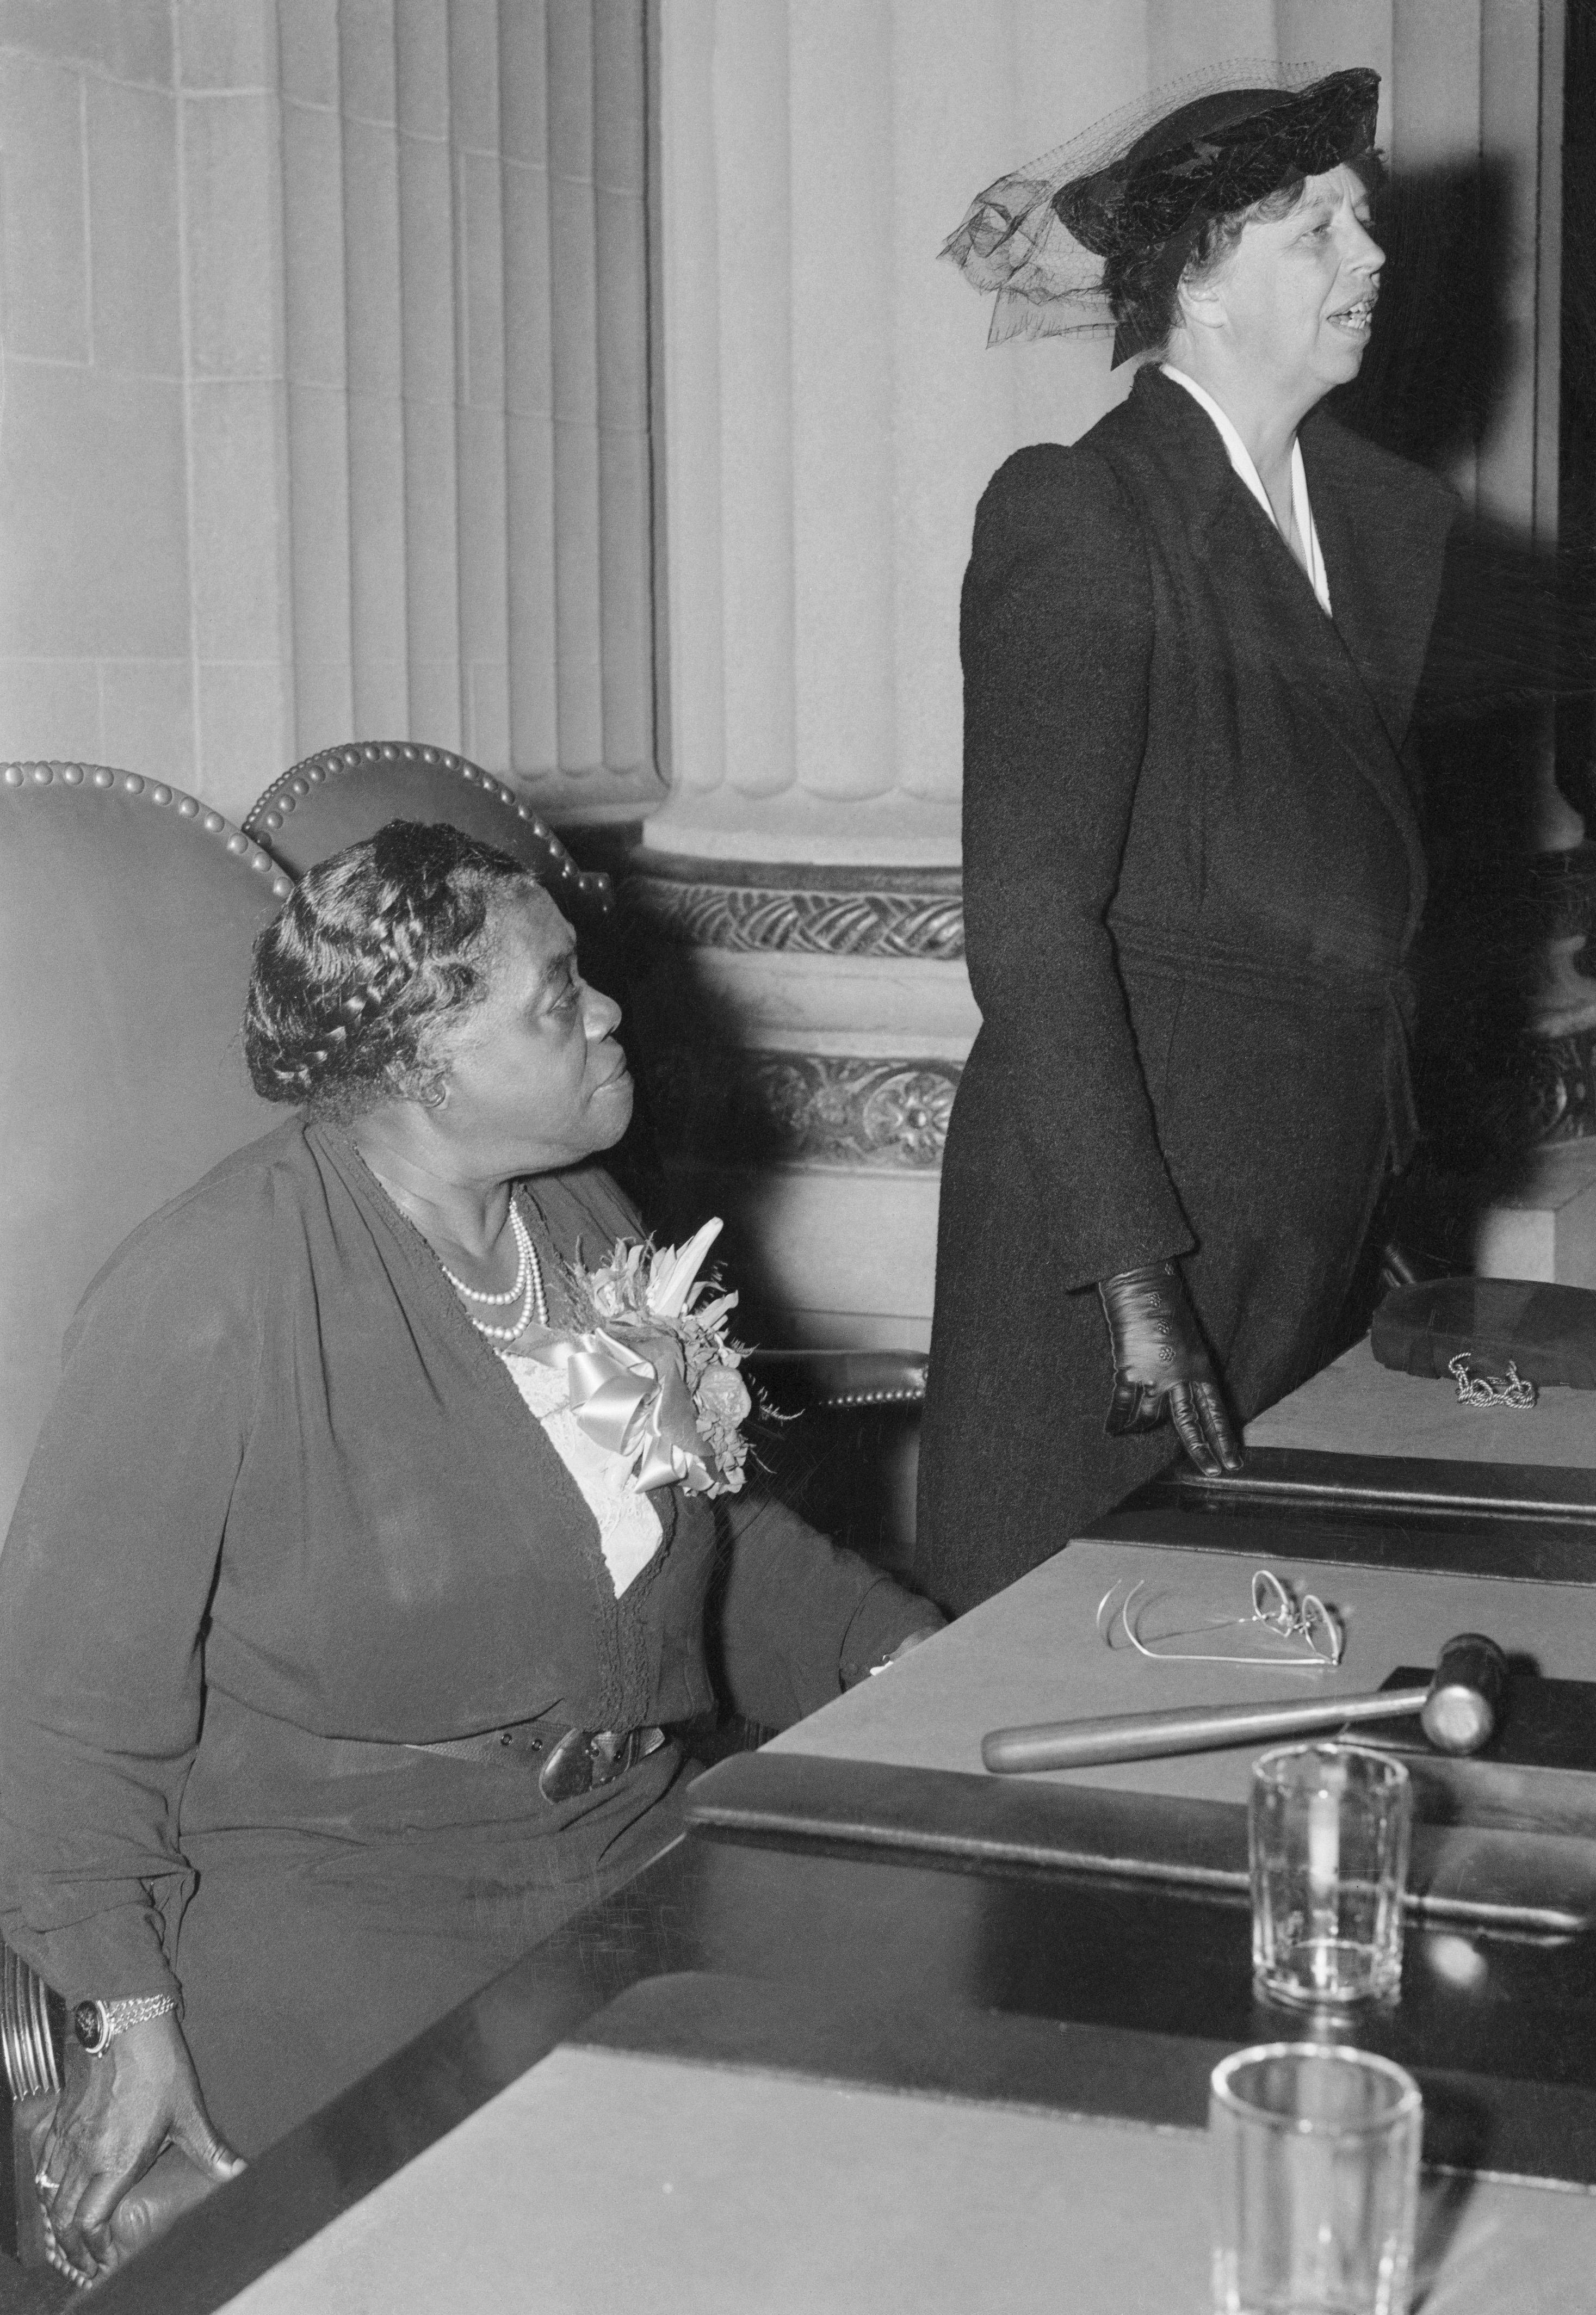 Mary McLeod Bethune: “First Lady of Negro America”